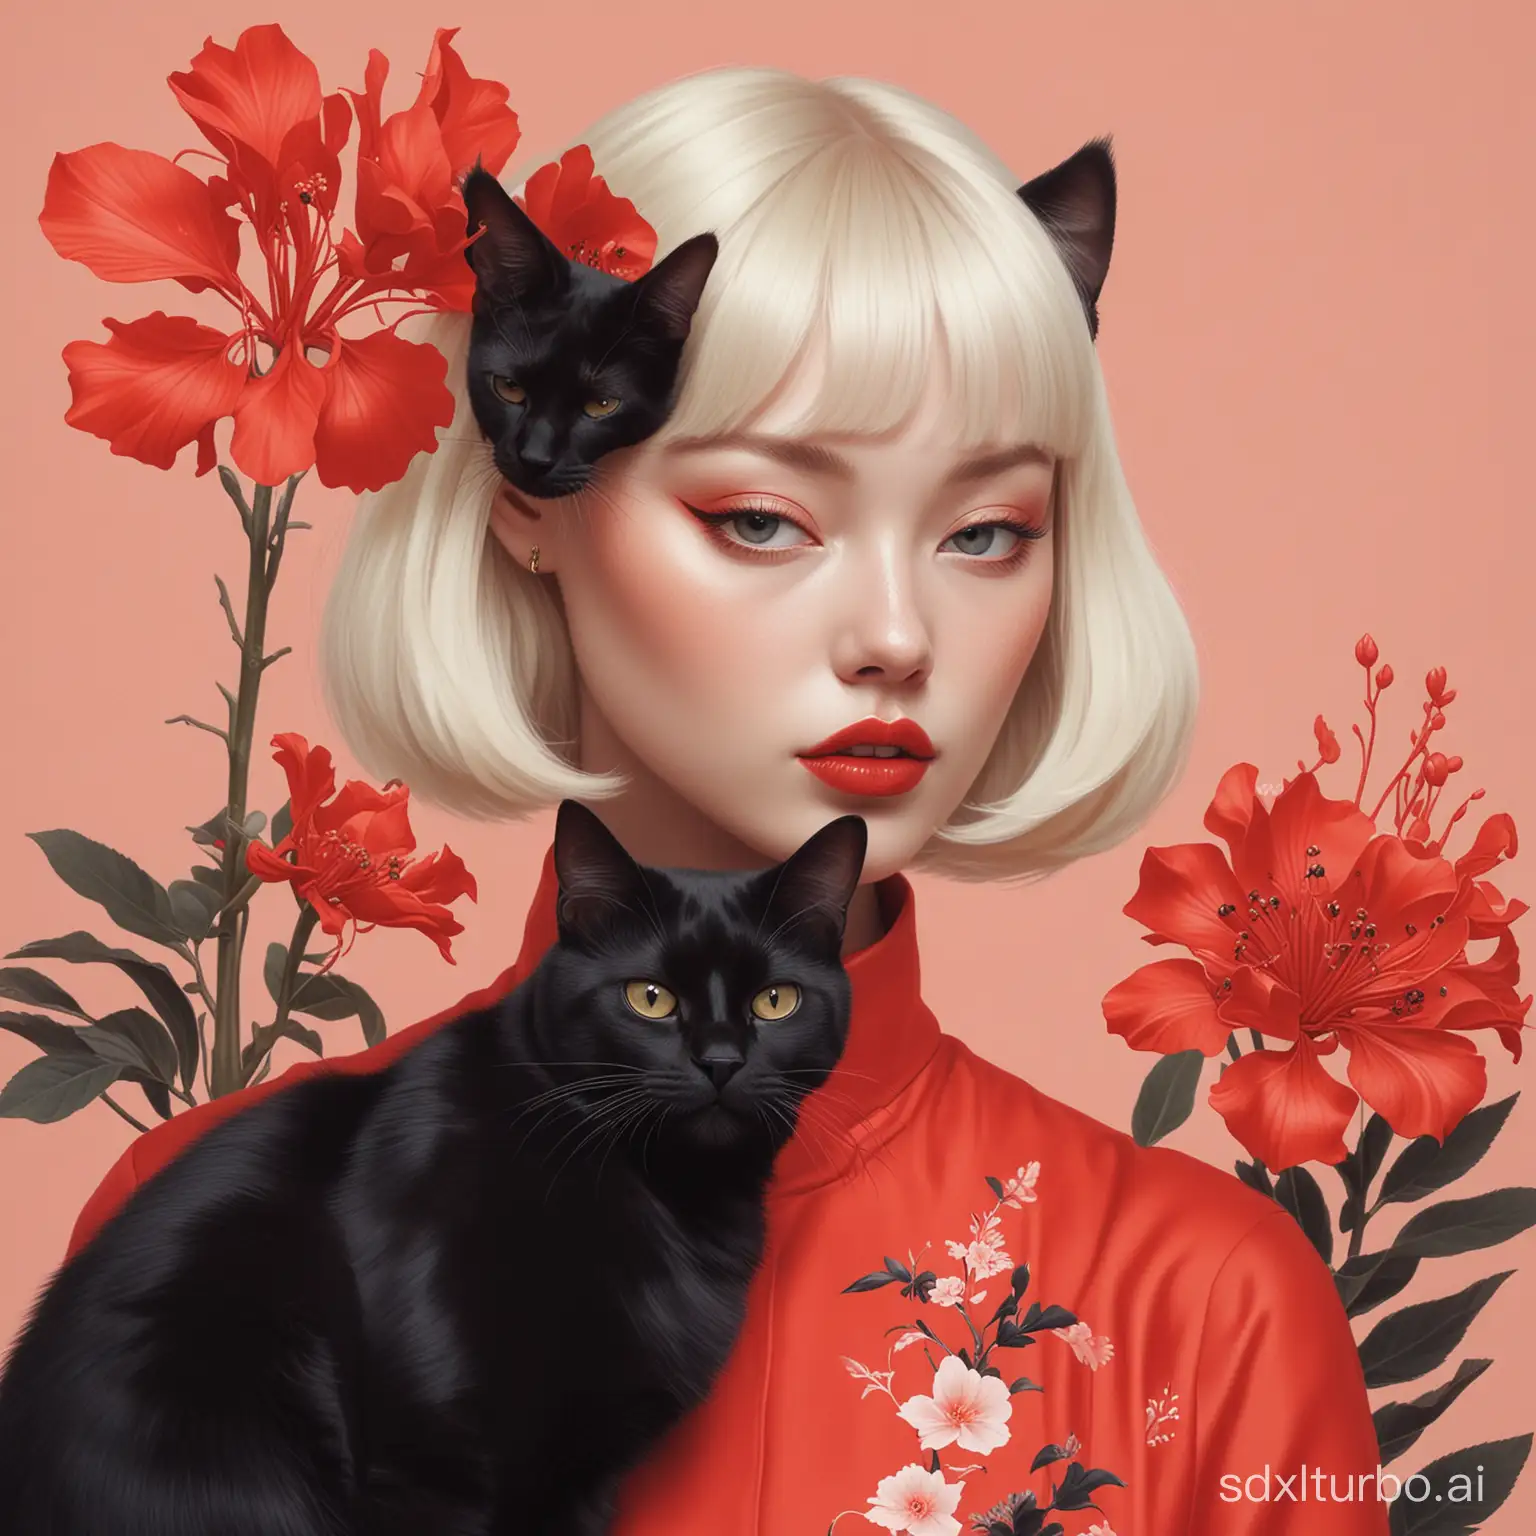 A fashion magazine featuring a pure black cat and a woman in the style of artist hsiao-ron cheng, black and red, hyper-realistic oils, Daan Roosegaarde, andrey remnev style, celebrity image mashup, featured animal plant, close-up, joong keun lee